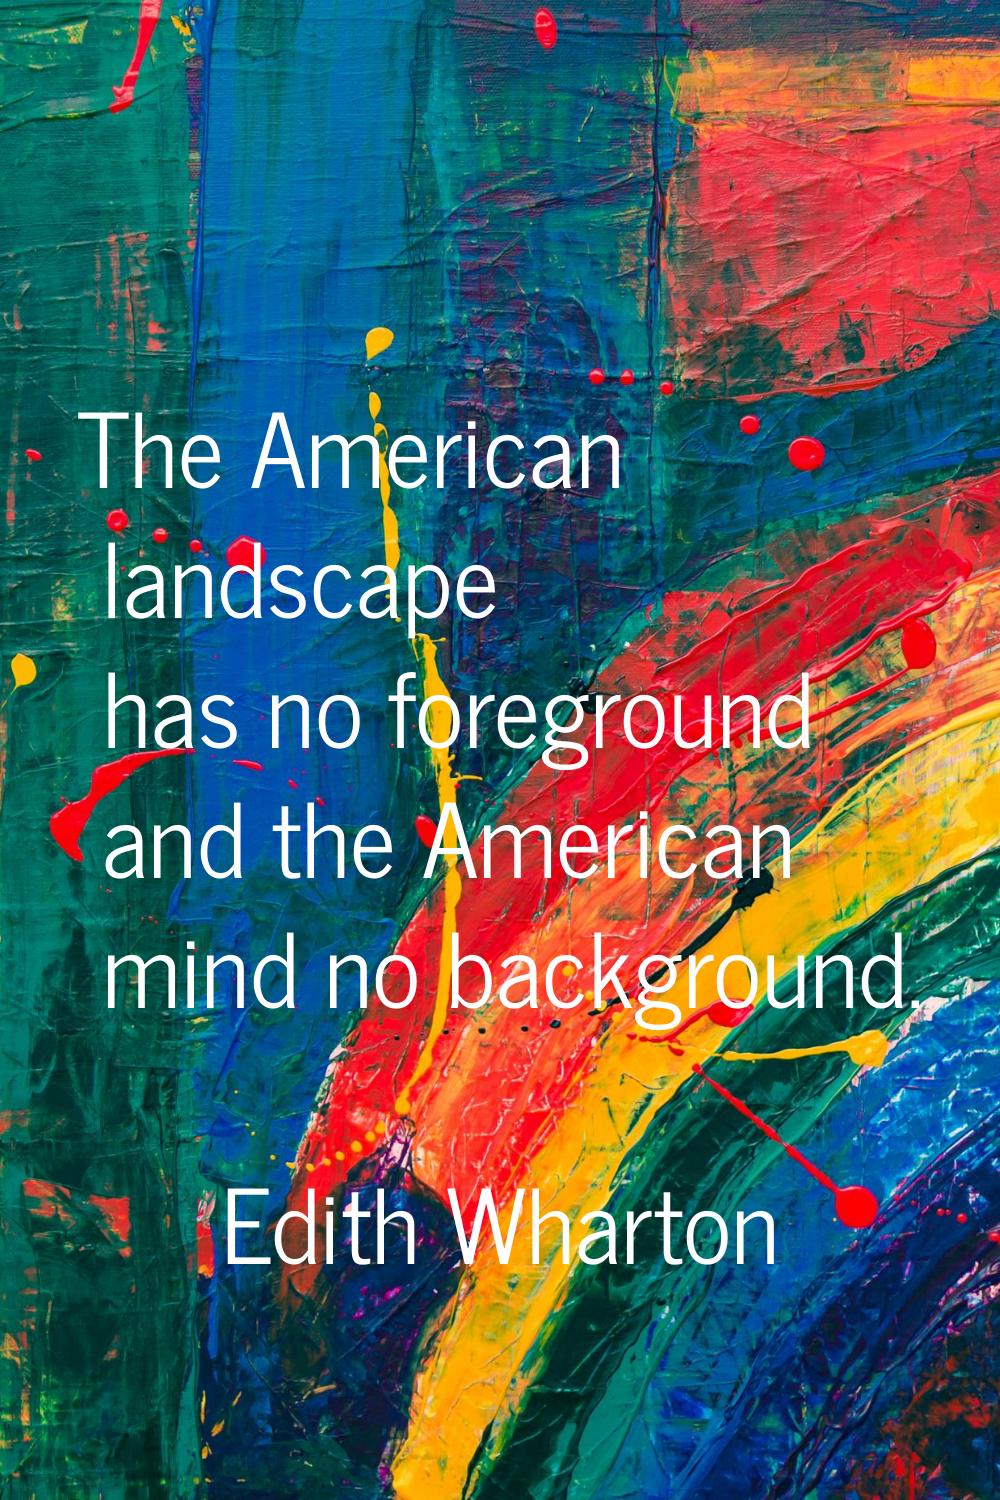 The American landscape has no foreground and the American mind no background.